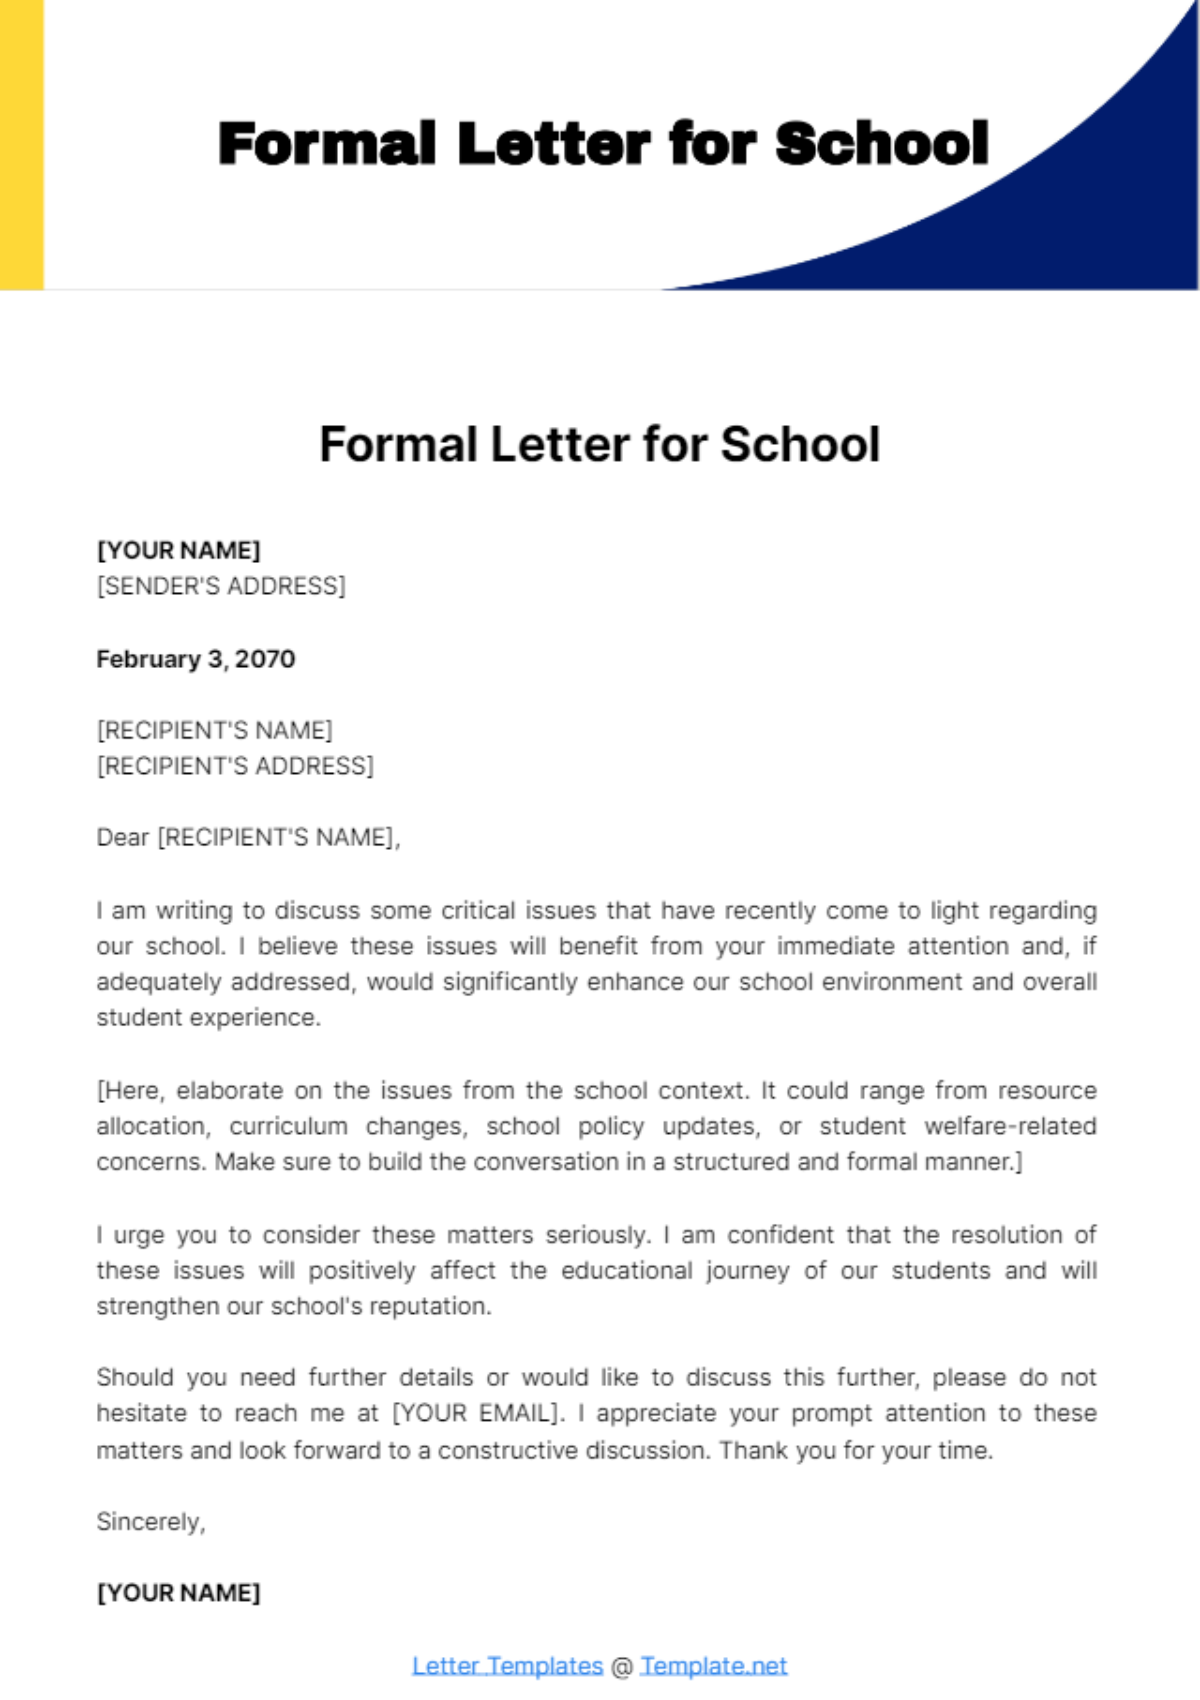 Free Formal Letter for School Template